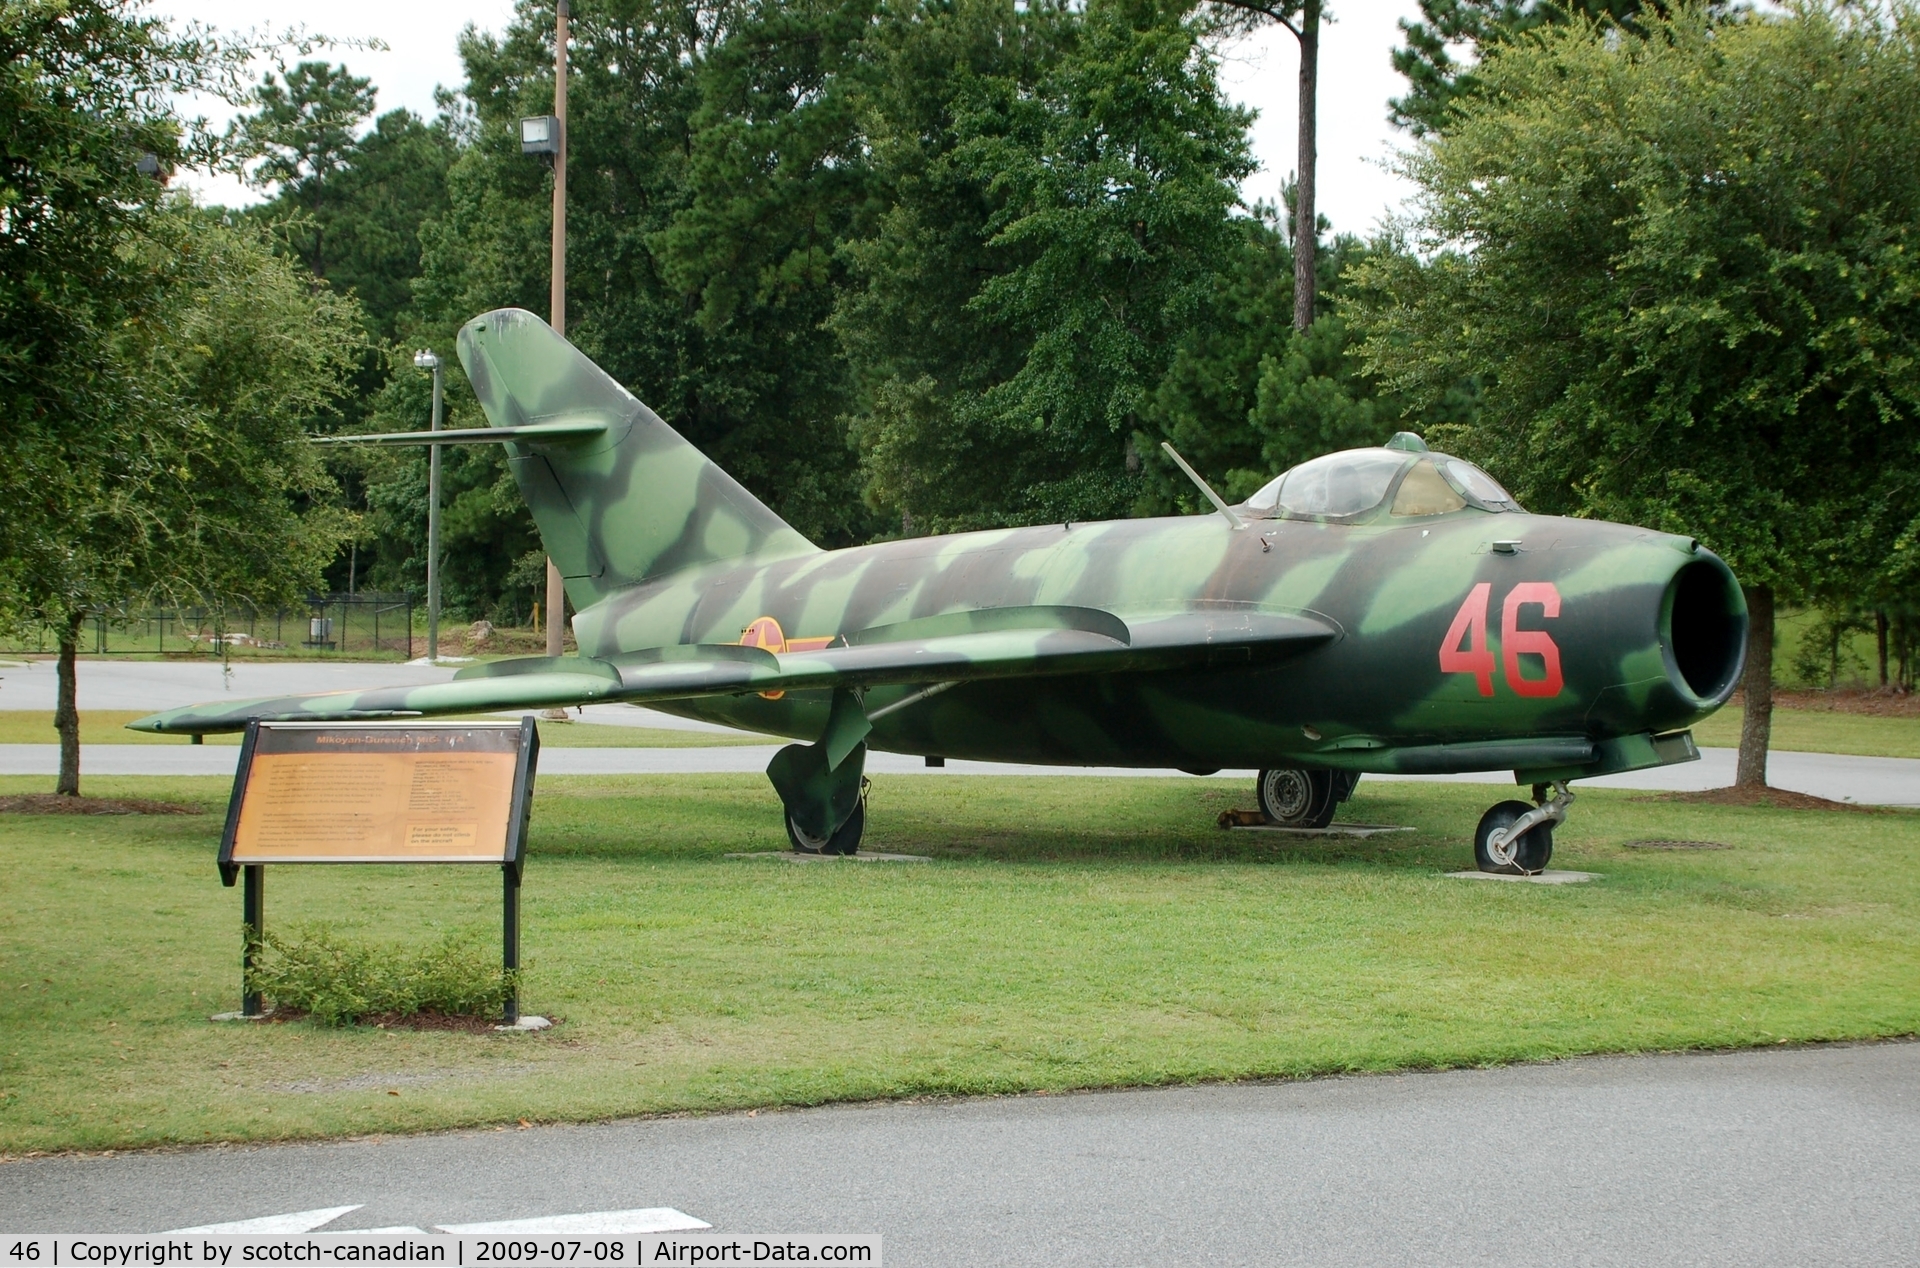 46, Mikoyan-Gurevich MiG-17A C/N 1589, Mikoyan-Gurevich MiG-17A at the Mighty 8th Air Force Museum, Pooler, GA